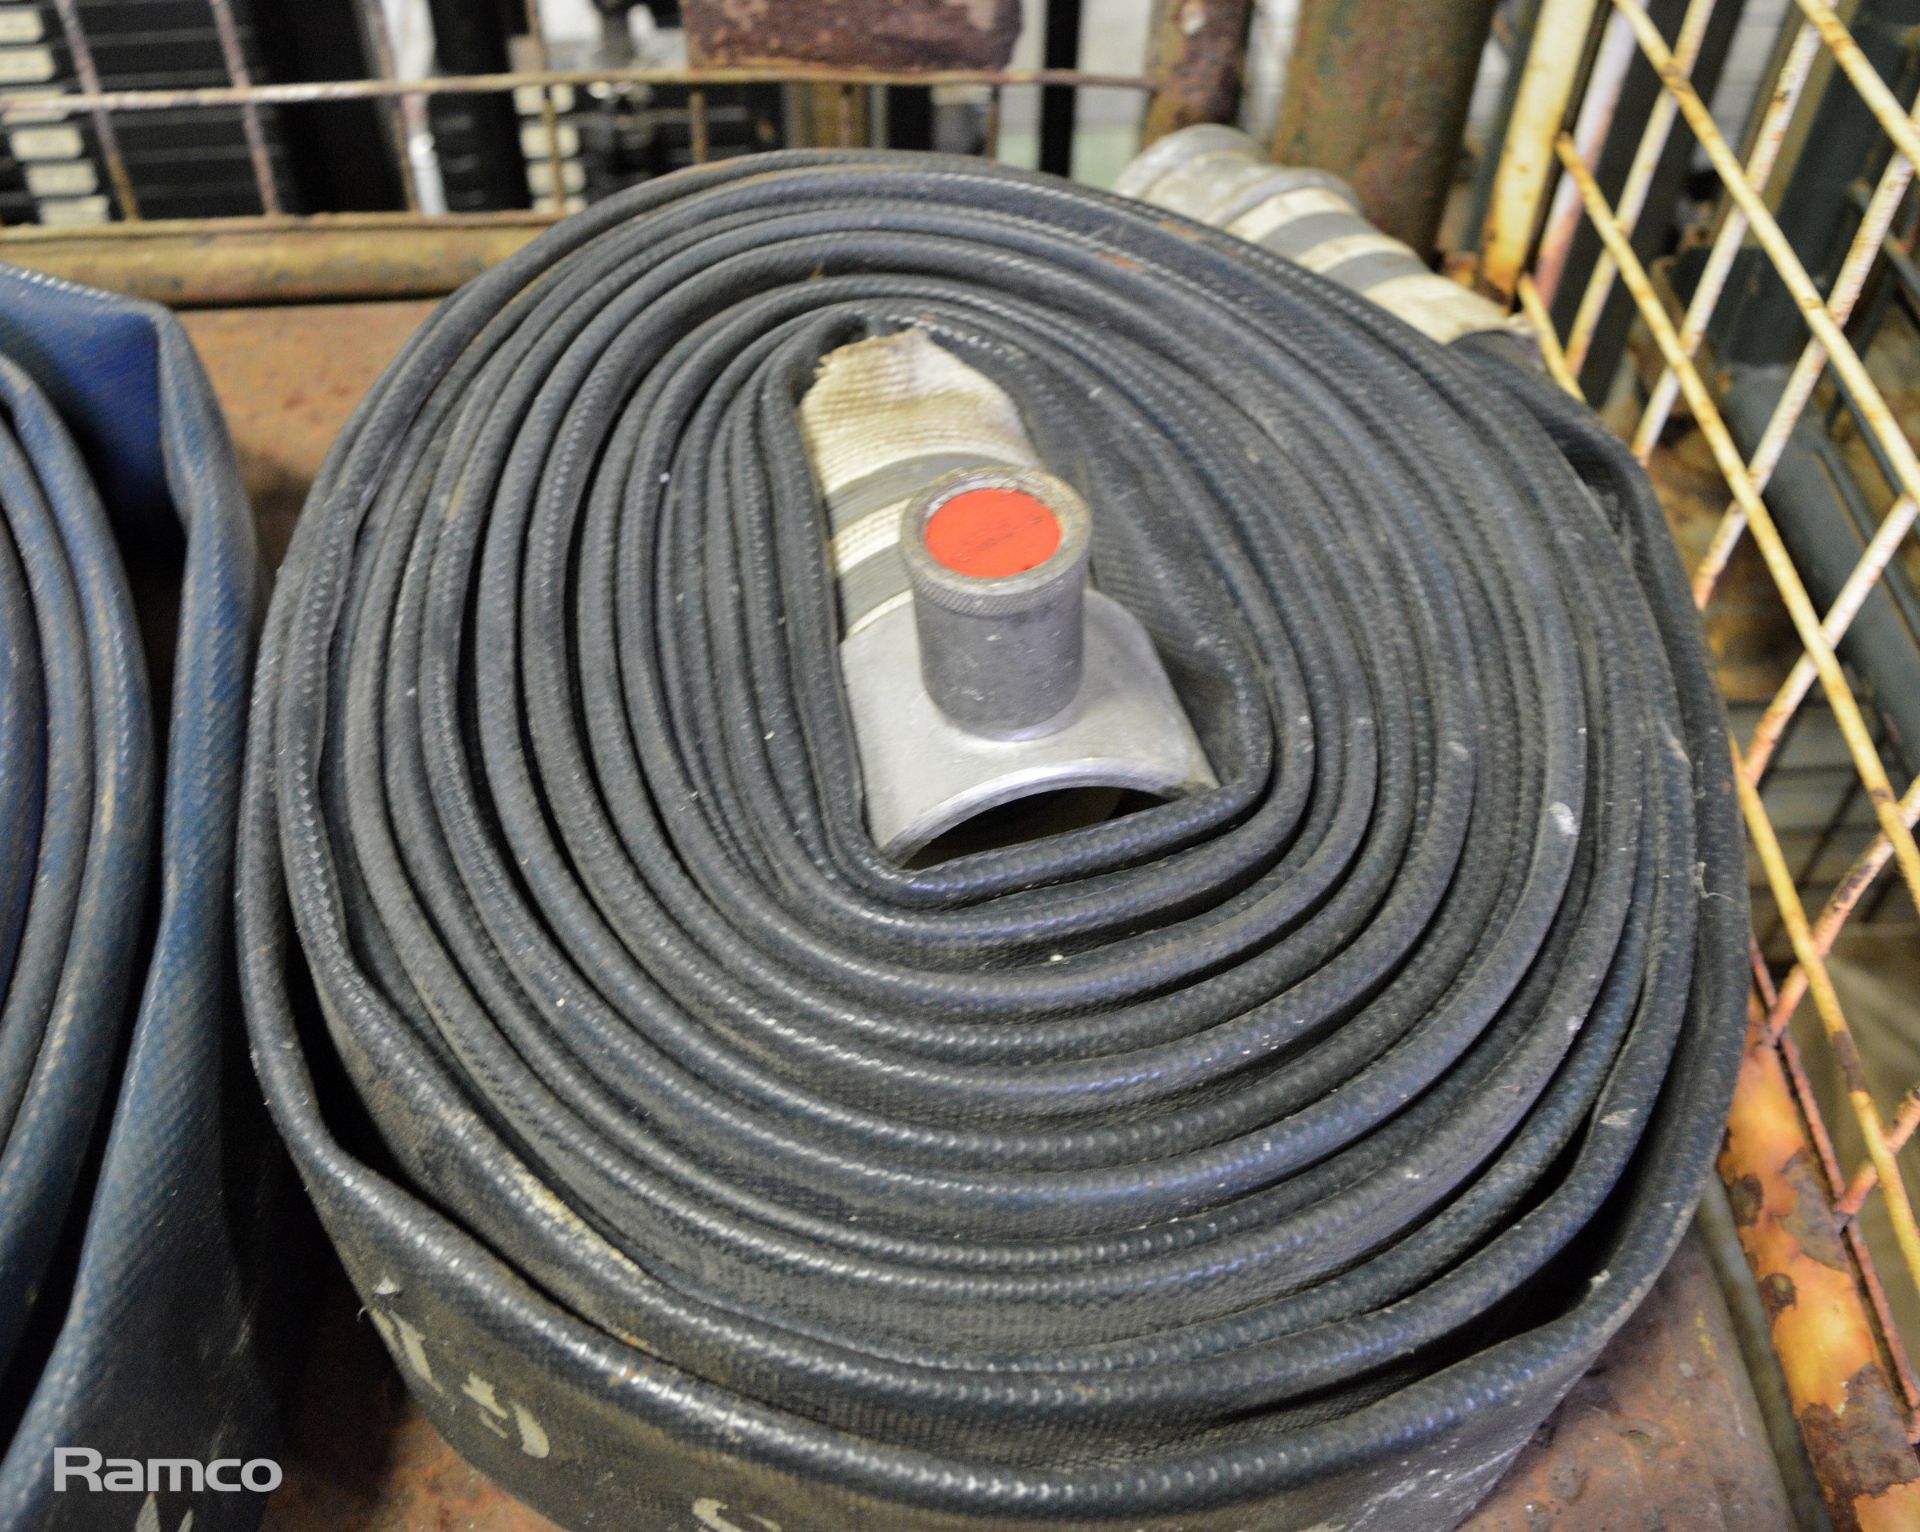 9x Assorted flat lay fire hose 65mm diameter - Image 4 of 4